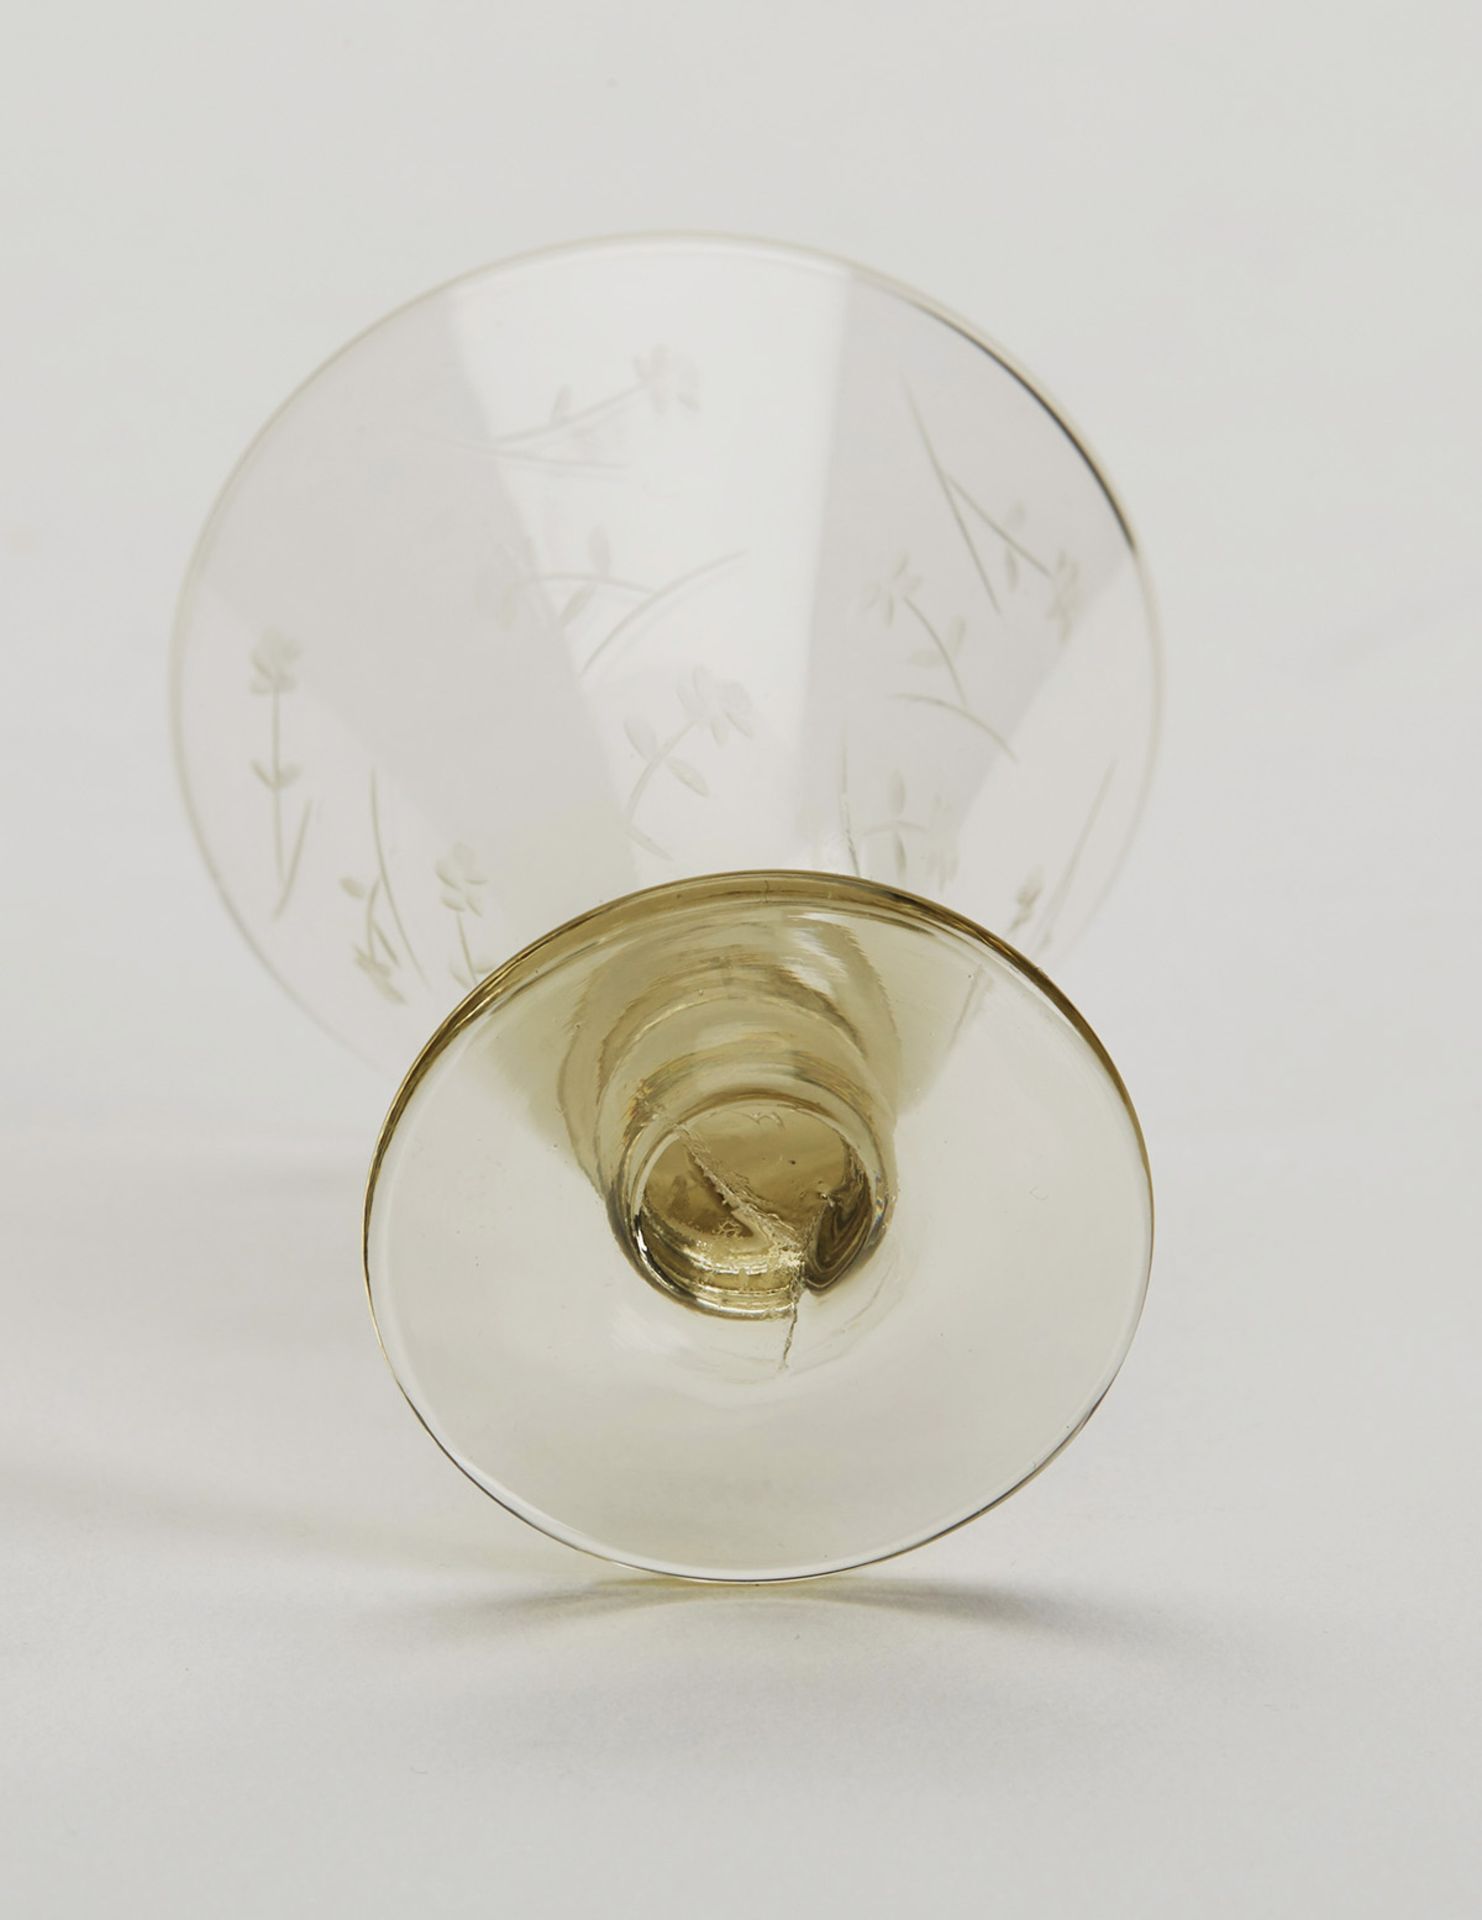 TWO CONTINENTAL ENGRAVED ETCHED WINE GLASSES 20TH C. - Image 6 of 6